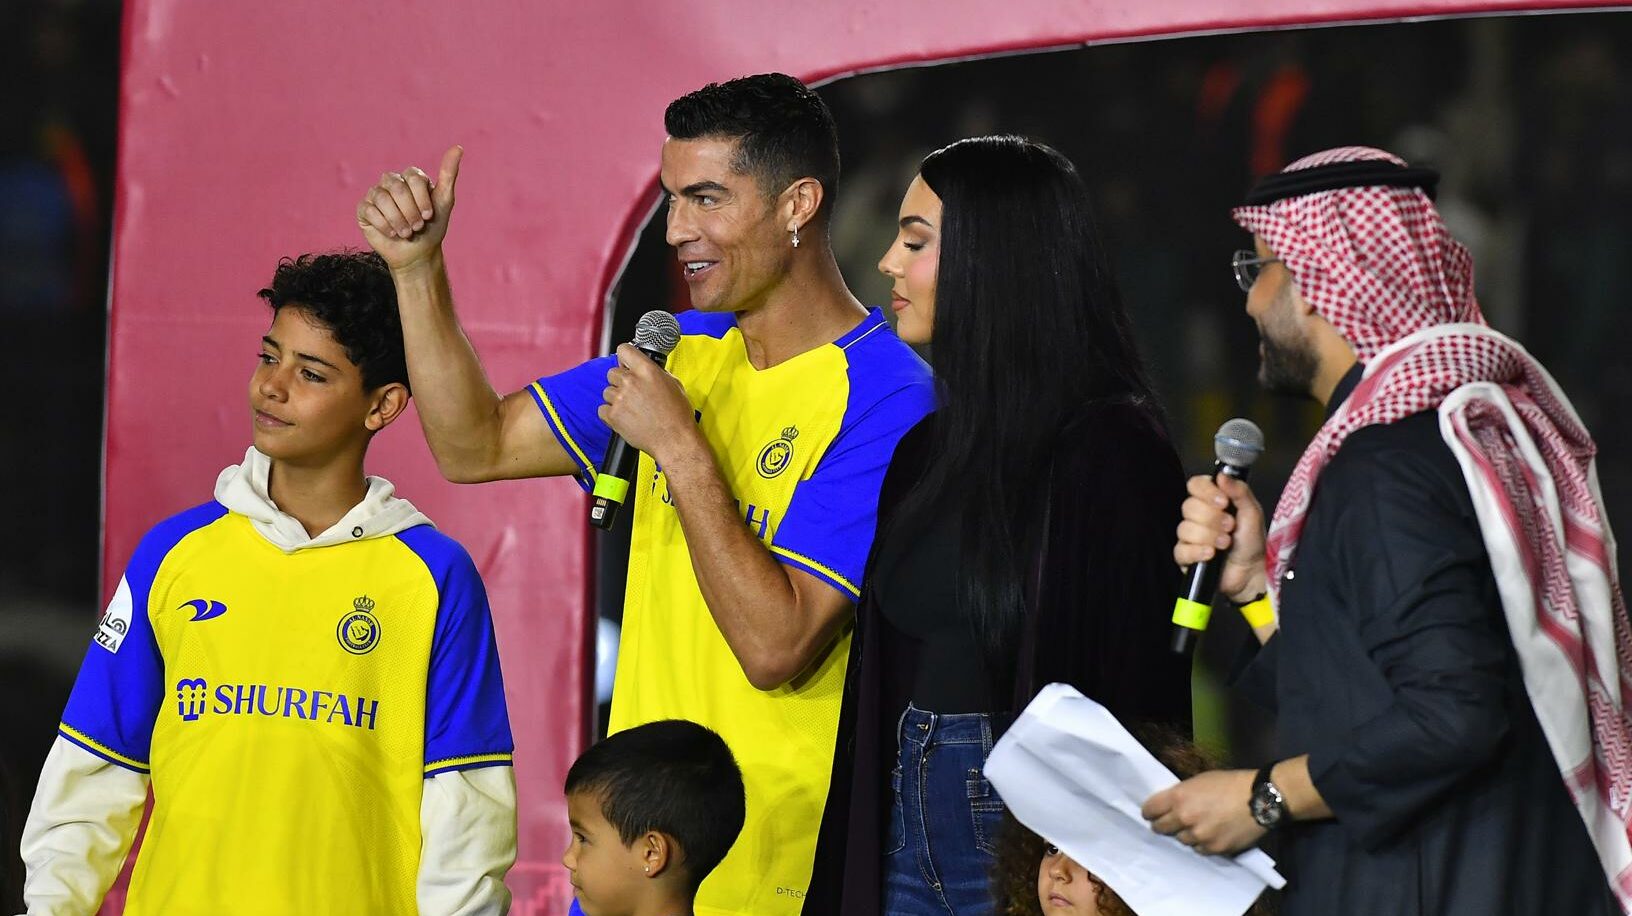 Cristiano Ronaldo presented after signing with Saudi Al-Nassr club